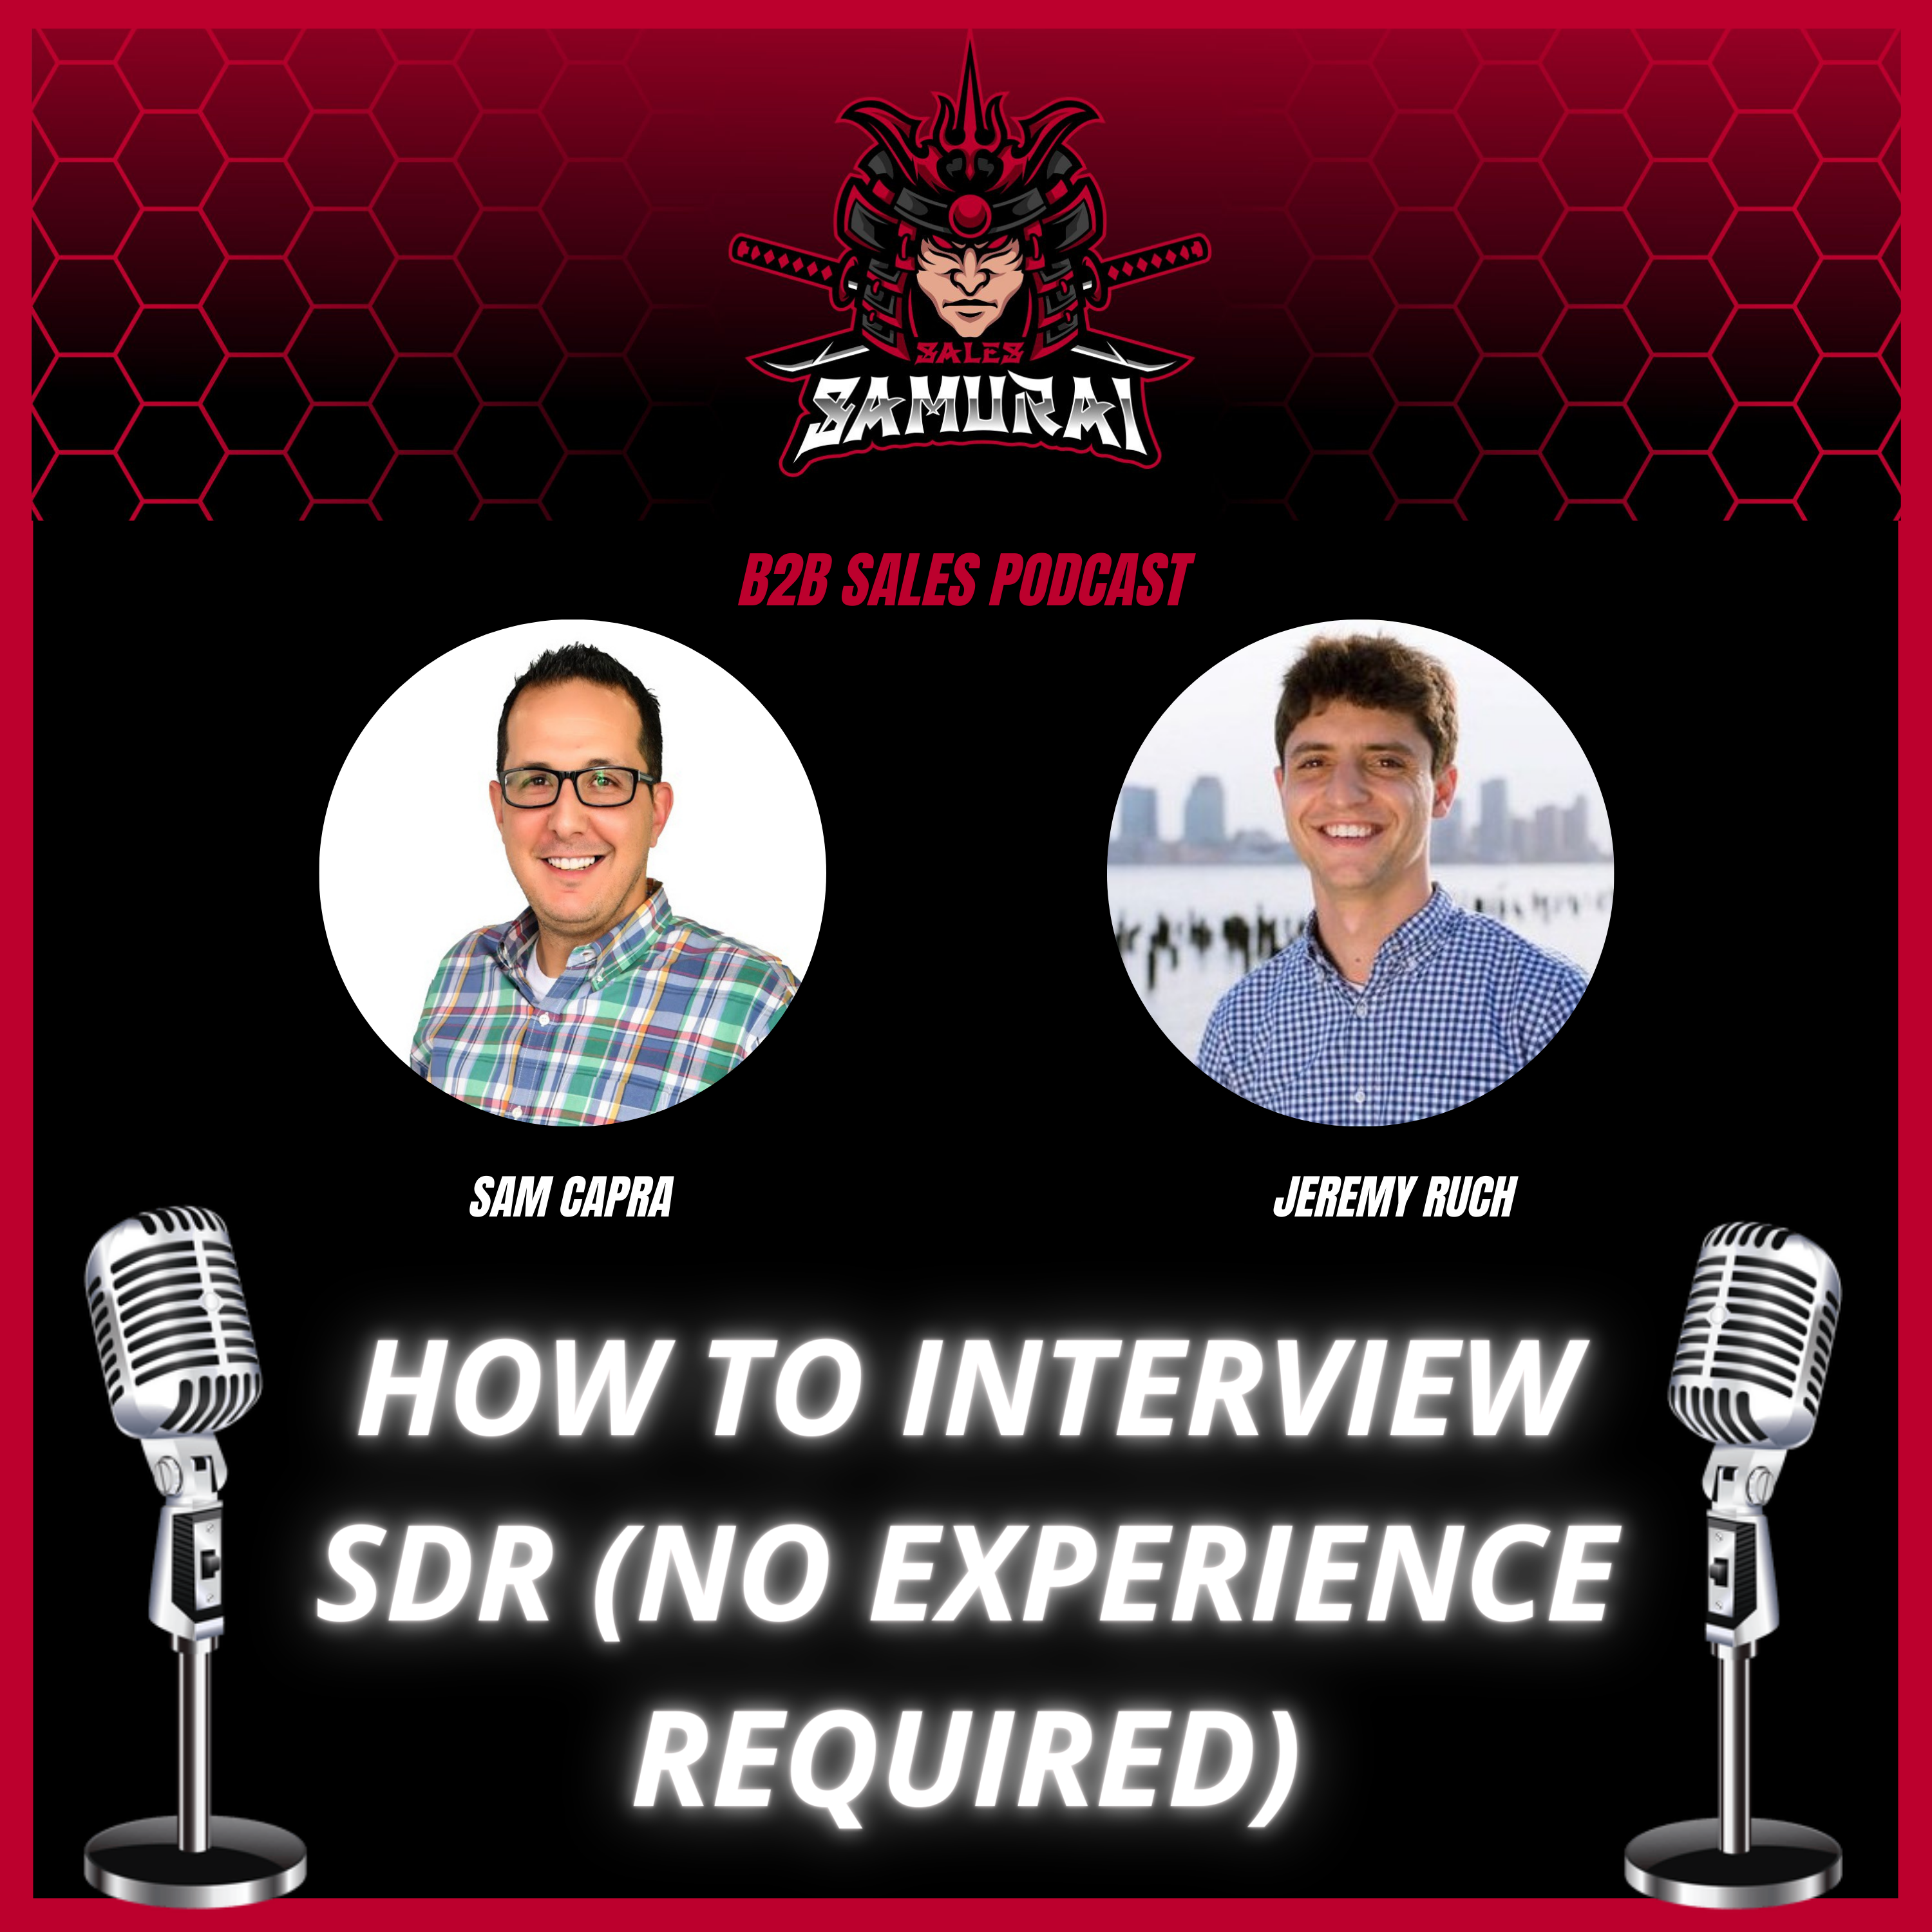 How to Interview SDR (No Experience Required) Image